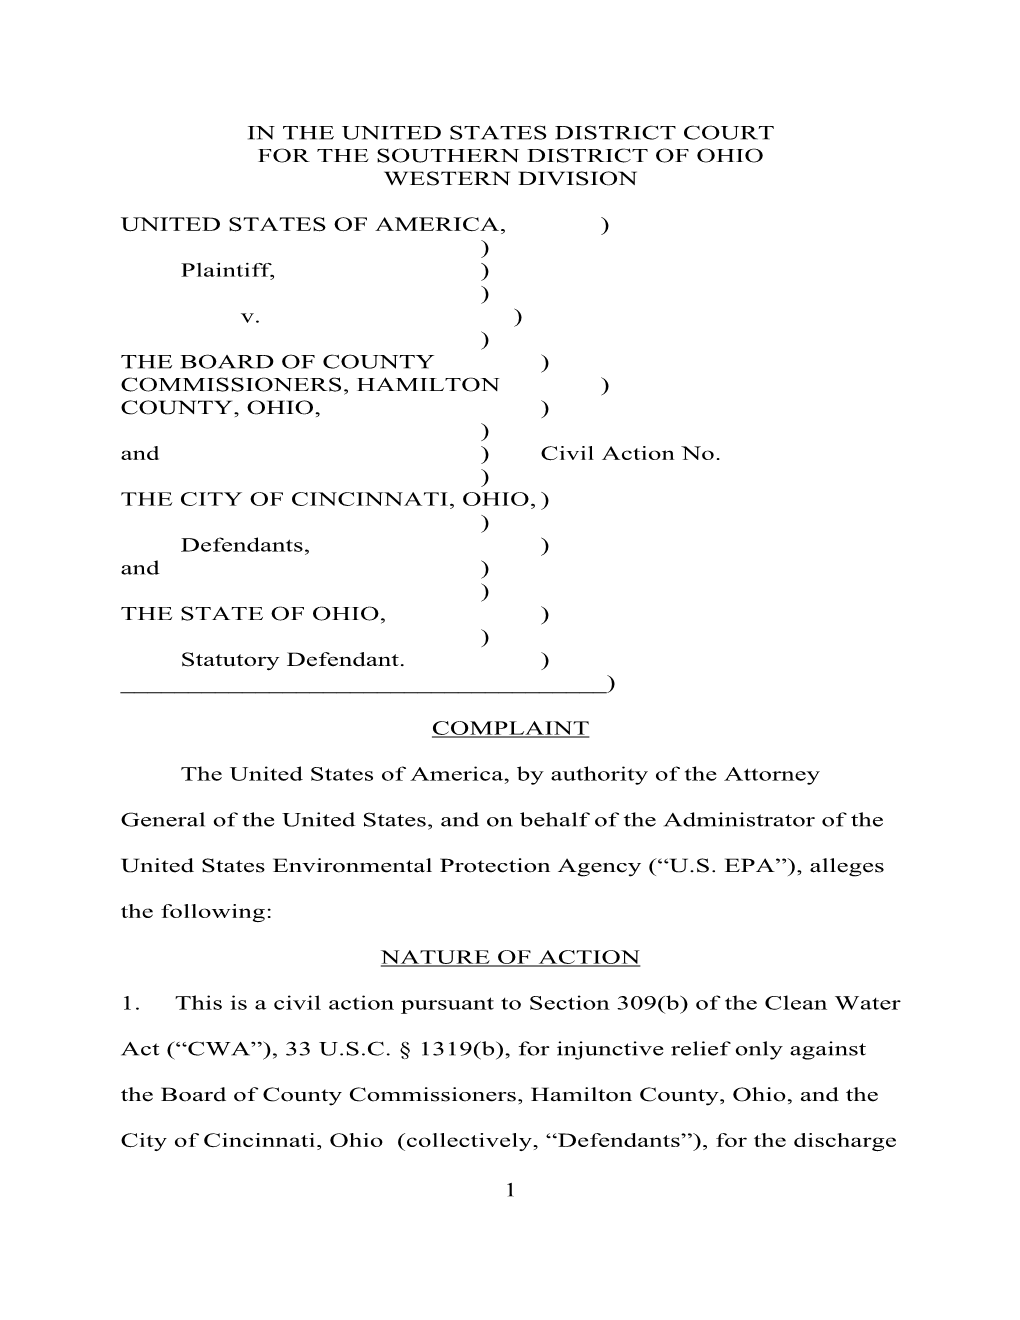 "Complaint: United States of America V. Board of County Commissioners